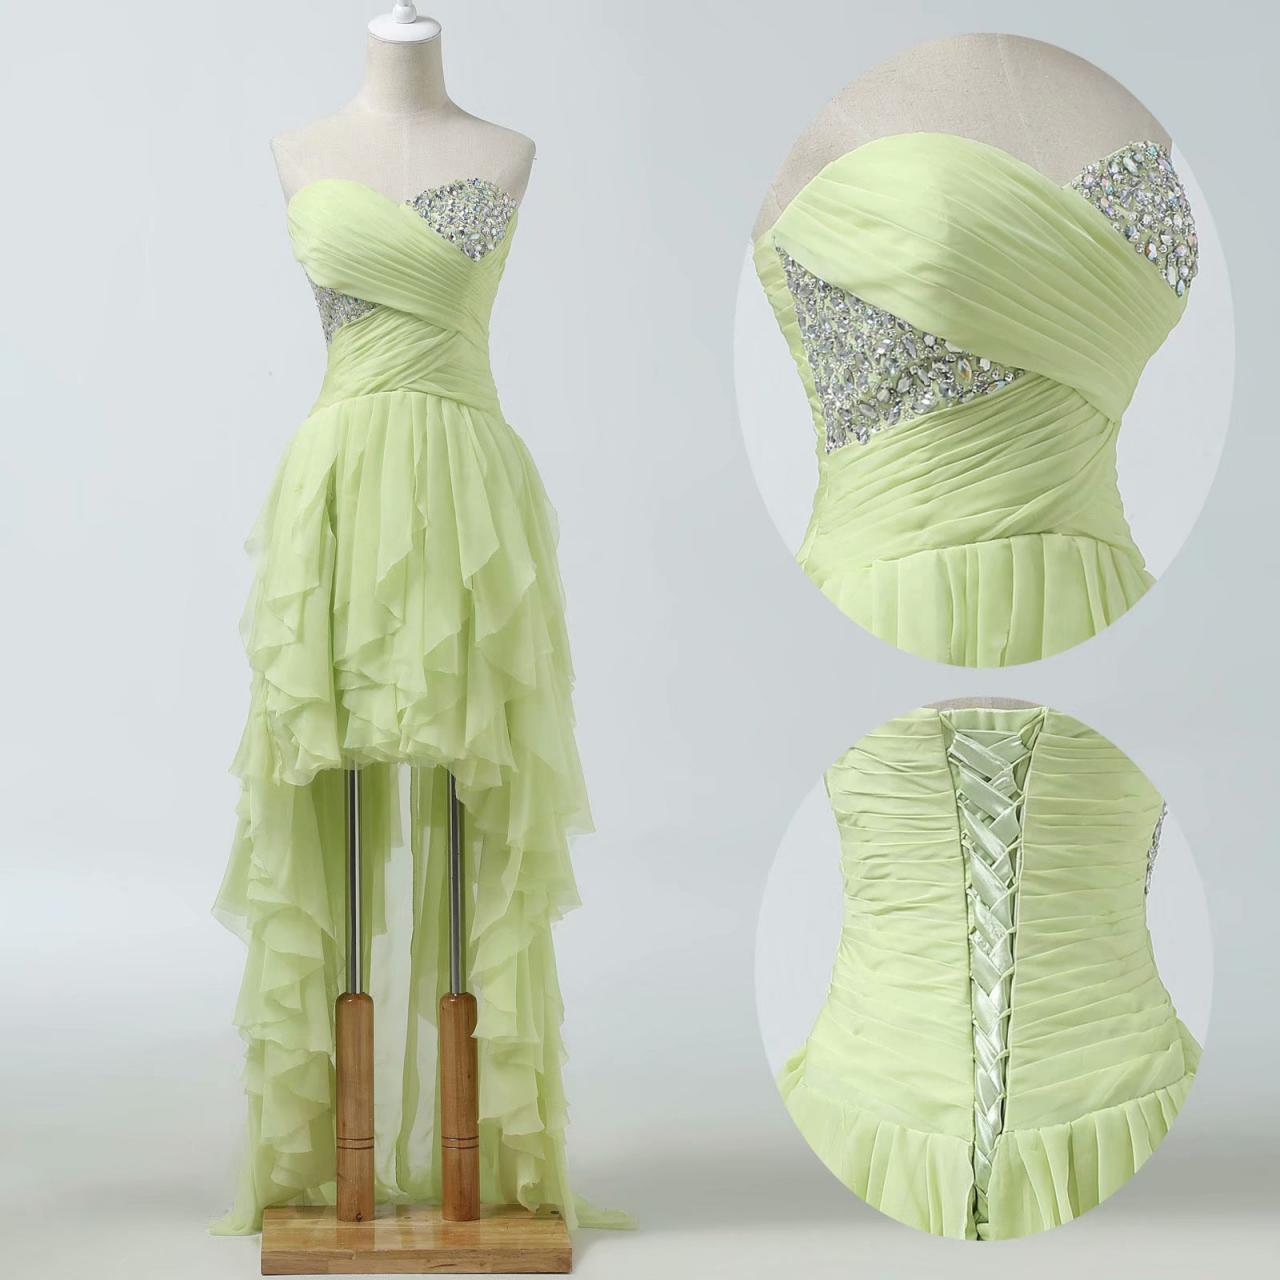 Long Mint Green High Low Formal Dresses Featuring Rhinestone Beaded Bodice With Sweetheart Neckline -- Chiffon Prom Dresses, Sexy Evening Gowns